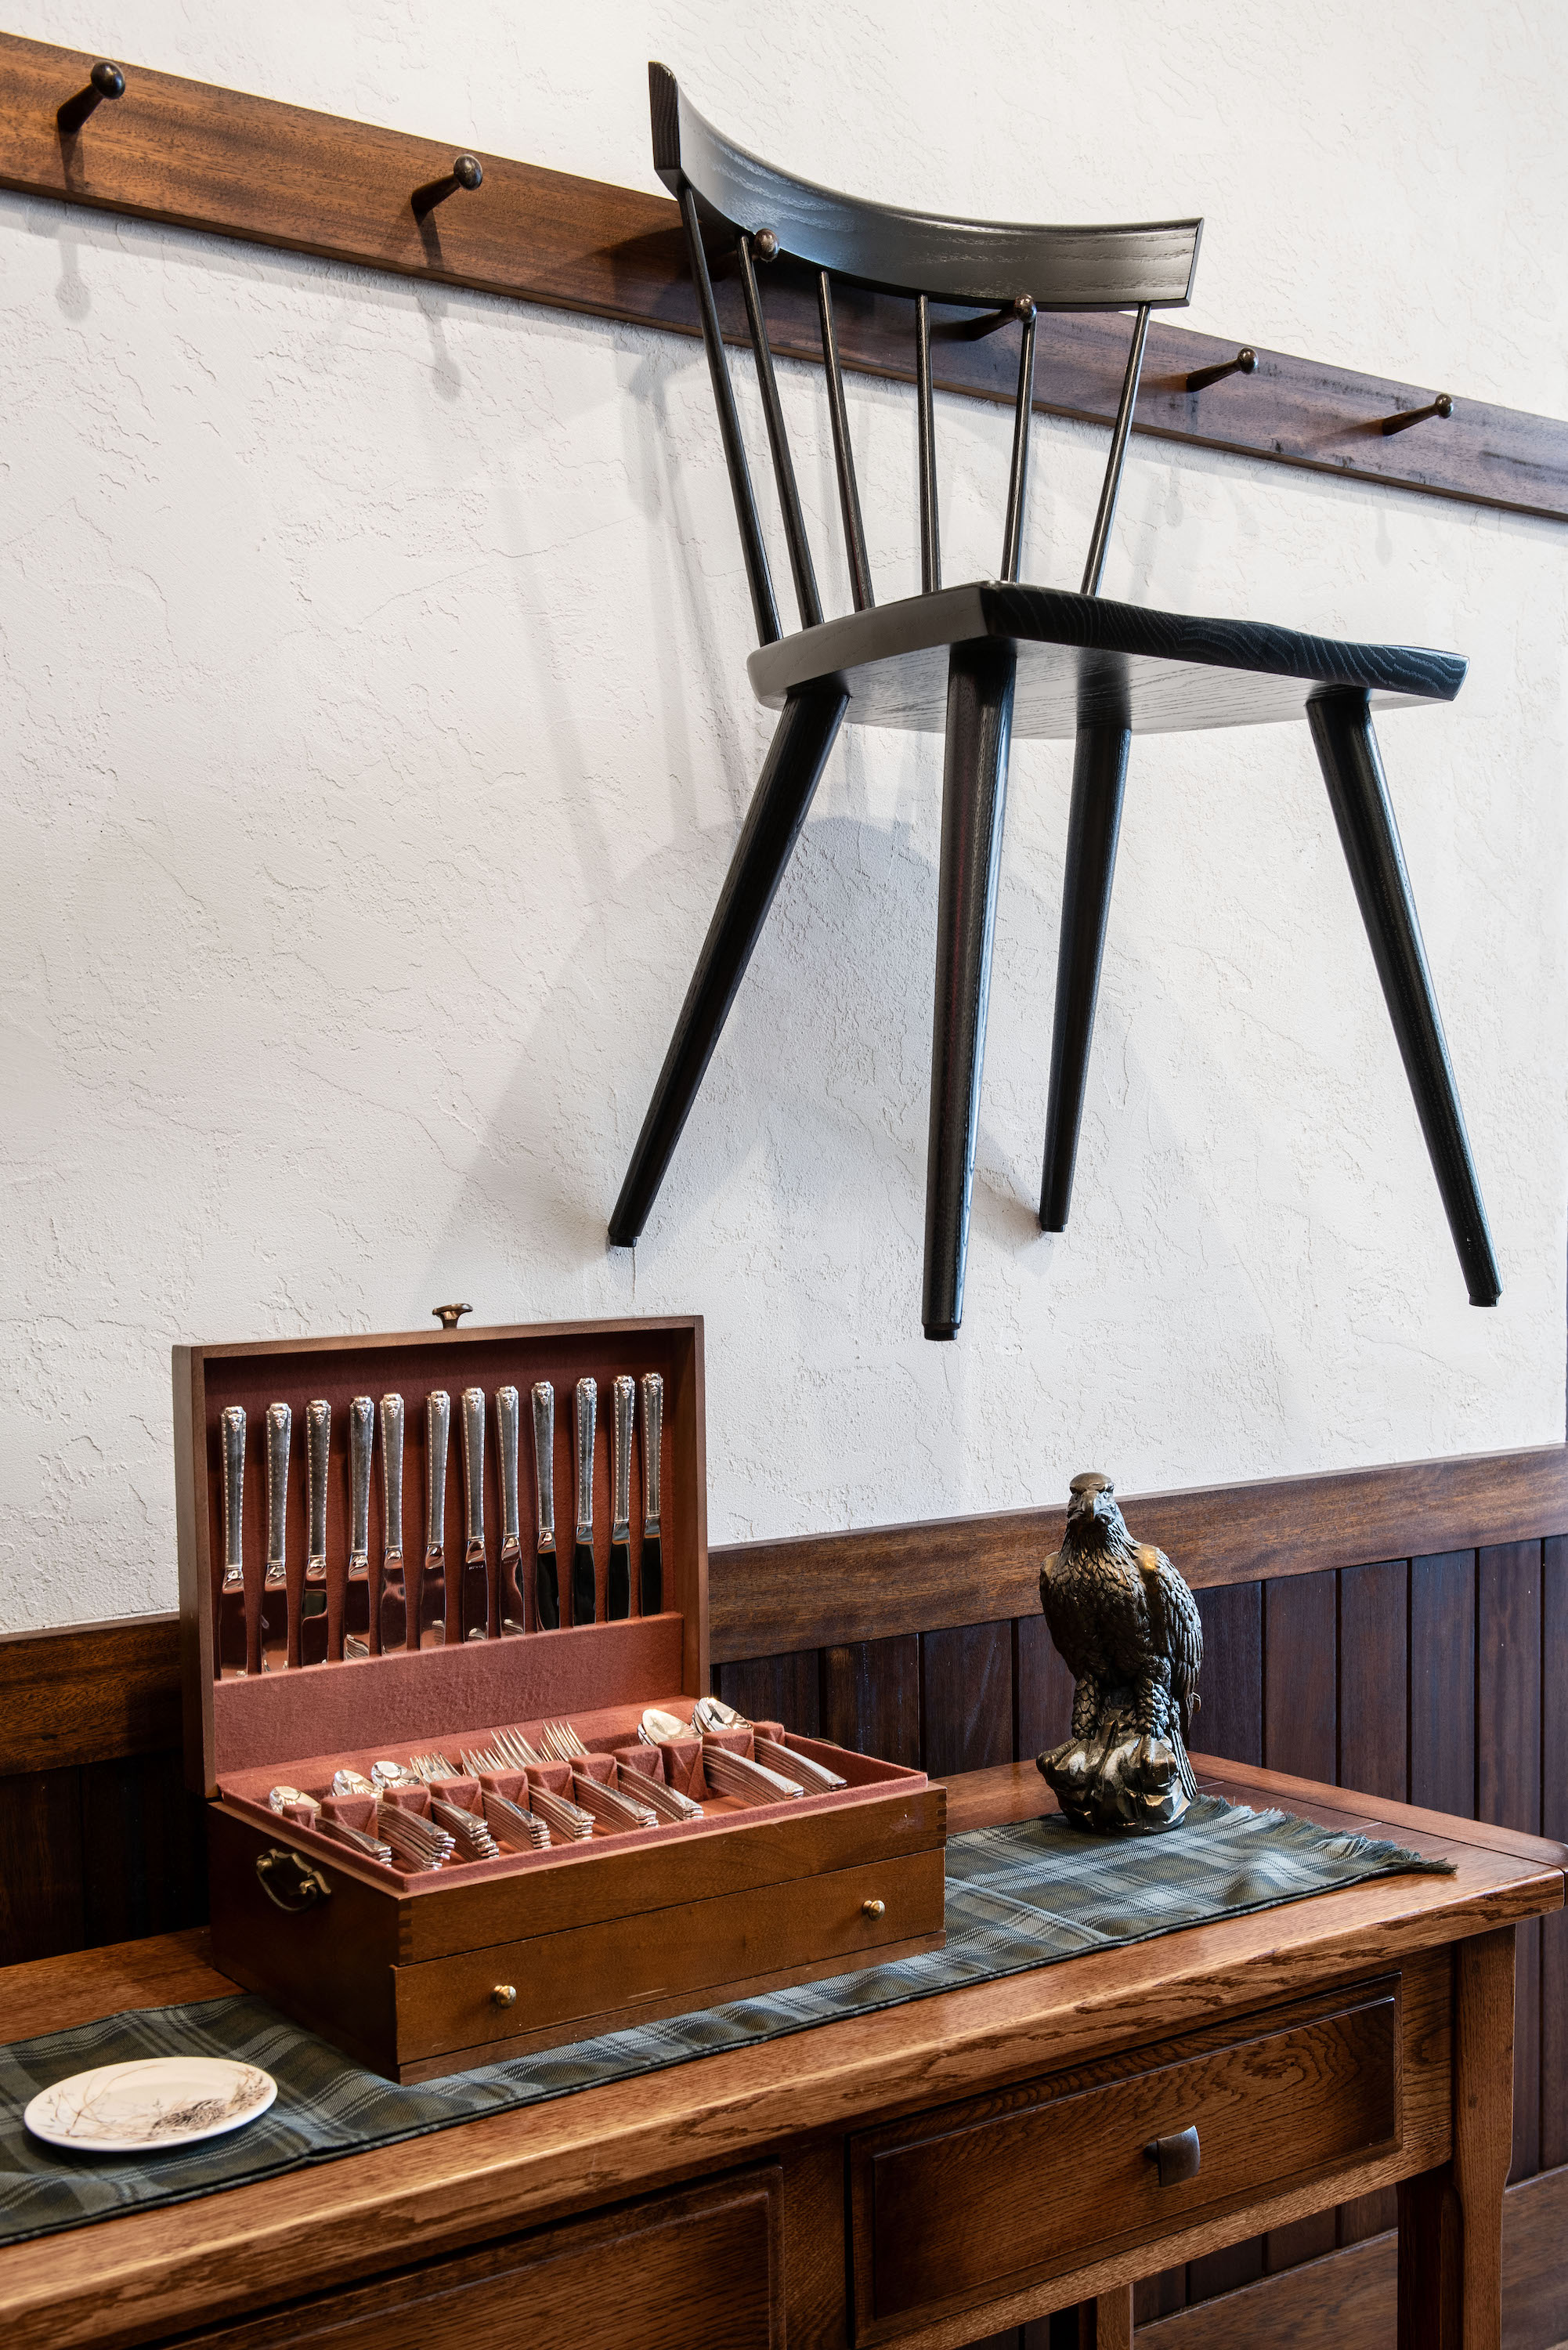 A chair hangs above a table with silverware in a box